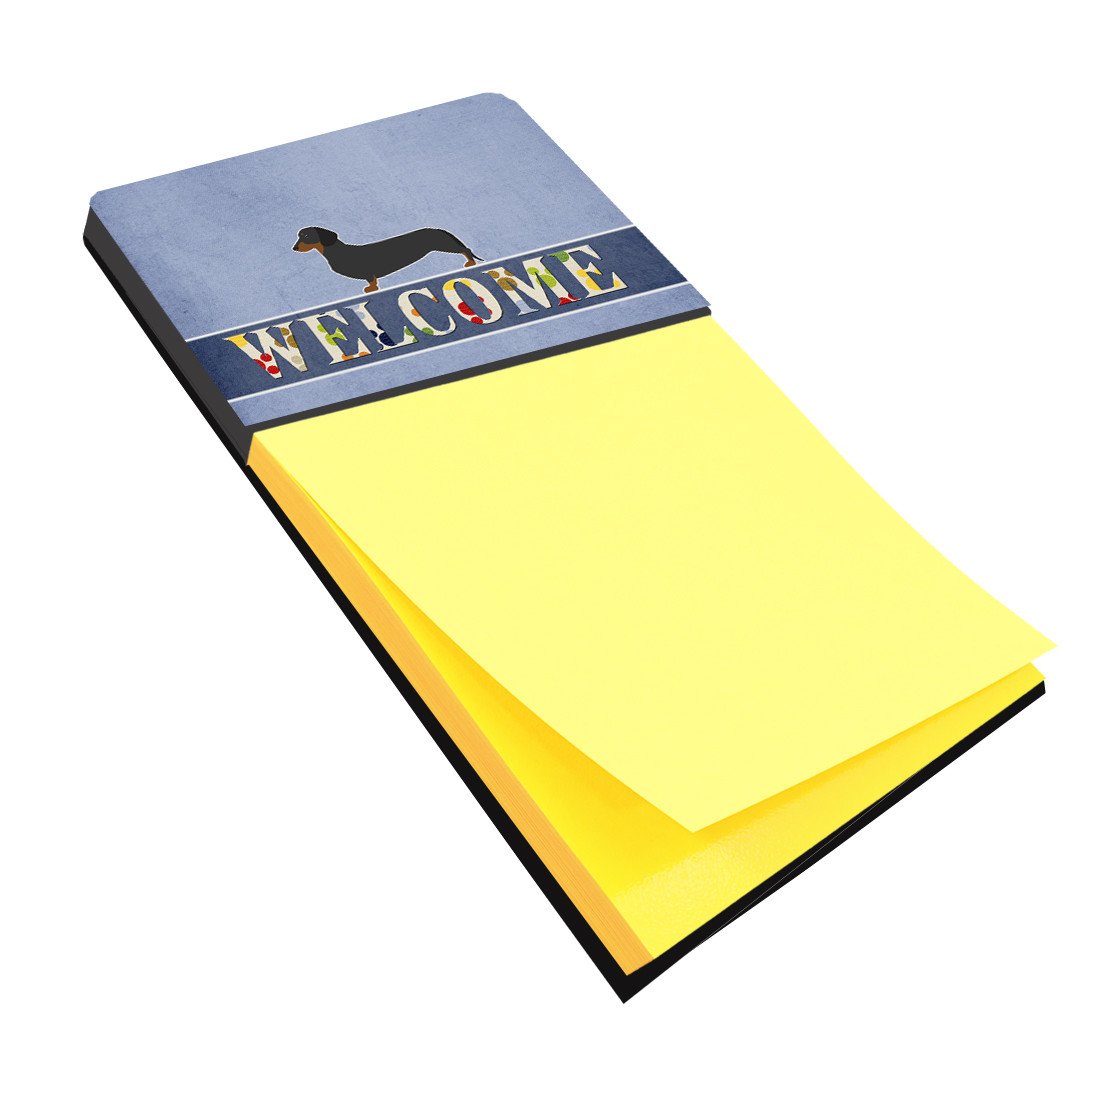 Dachshund Welcome Sticky Note Holder BB5486SN by Caroline's Treasures